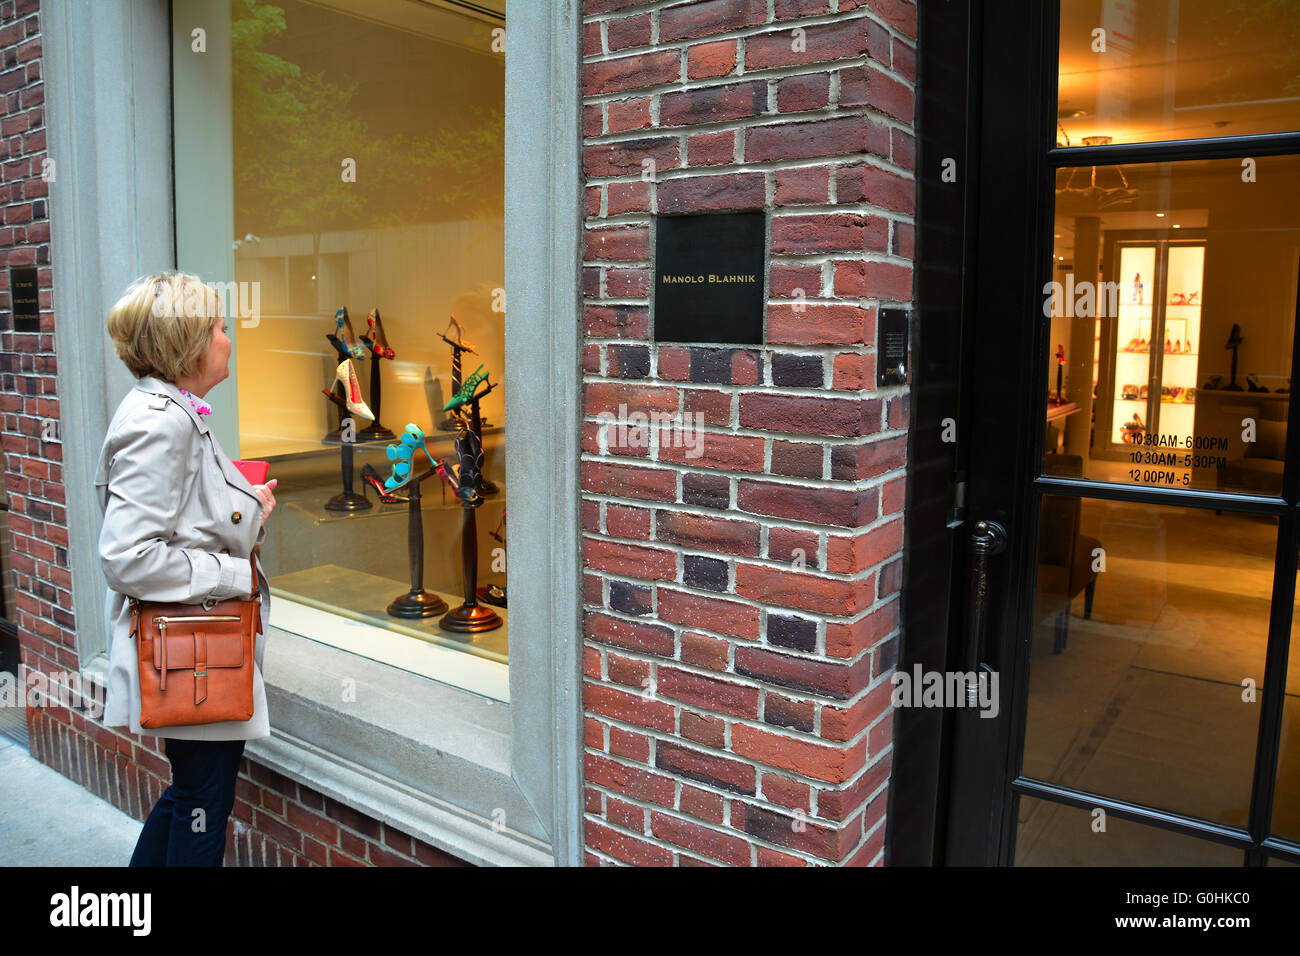 A woman looking in the window of Manolo Blahnik, New York City Stock Photo